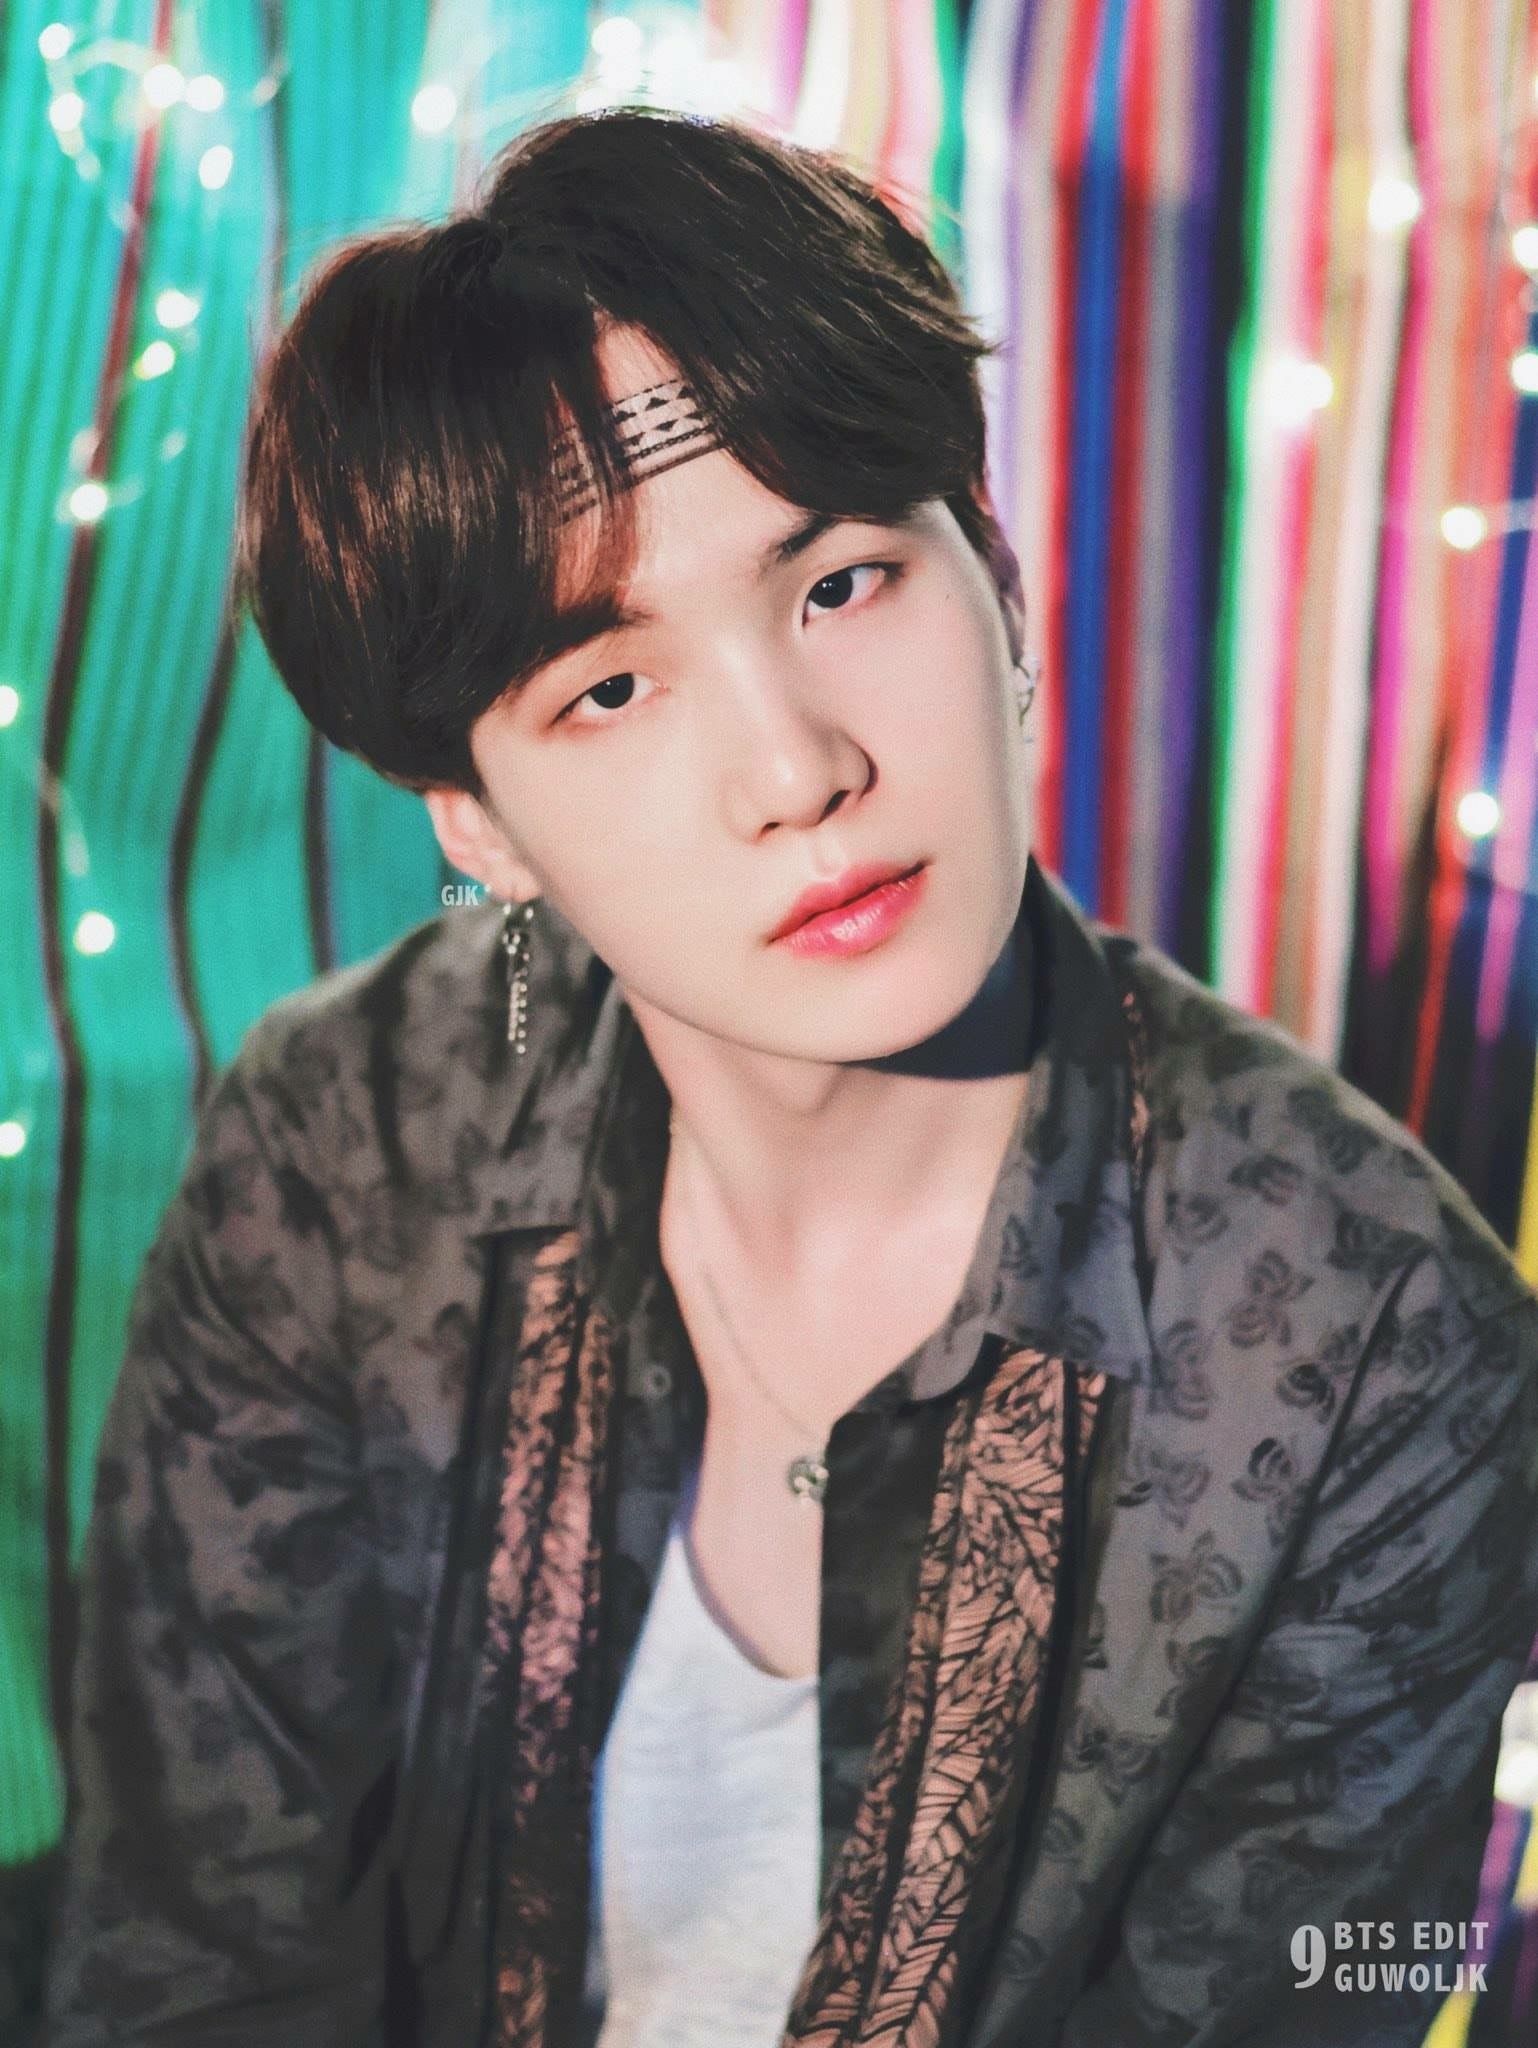 bts-suga-net-worth-2021-updated-did-the-shoulder-issue-lower-his-earnings-and-total-assets